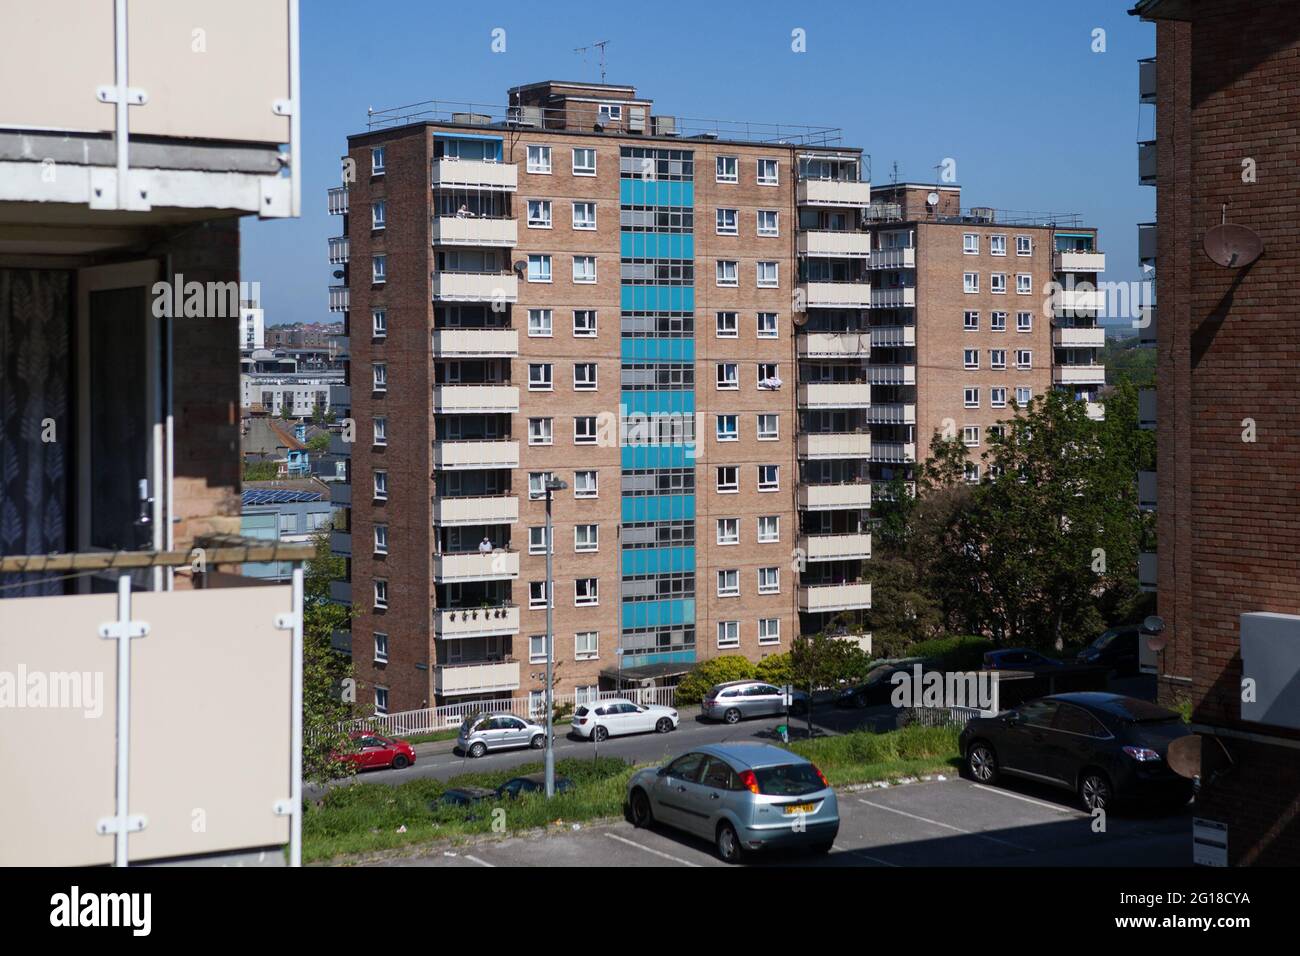 A council housing block in Brighton, East Sussex, UK Stock Photo